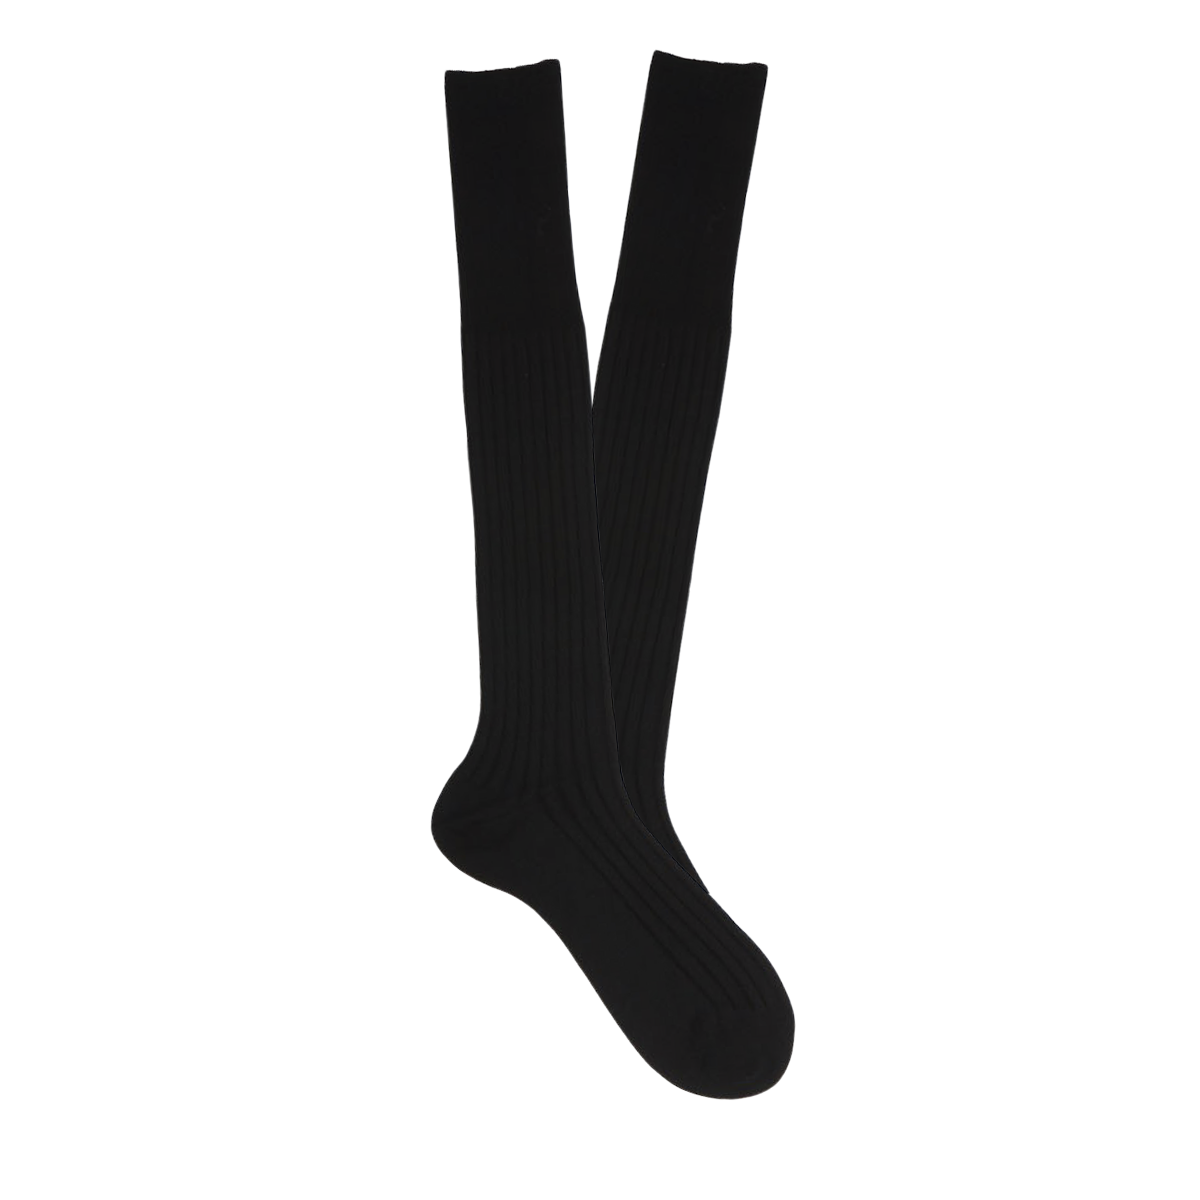 Canali Black Knee Long Ribbed Cotton Socks Feature